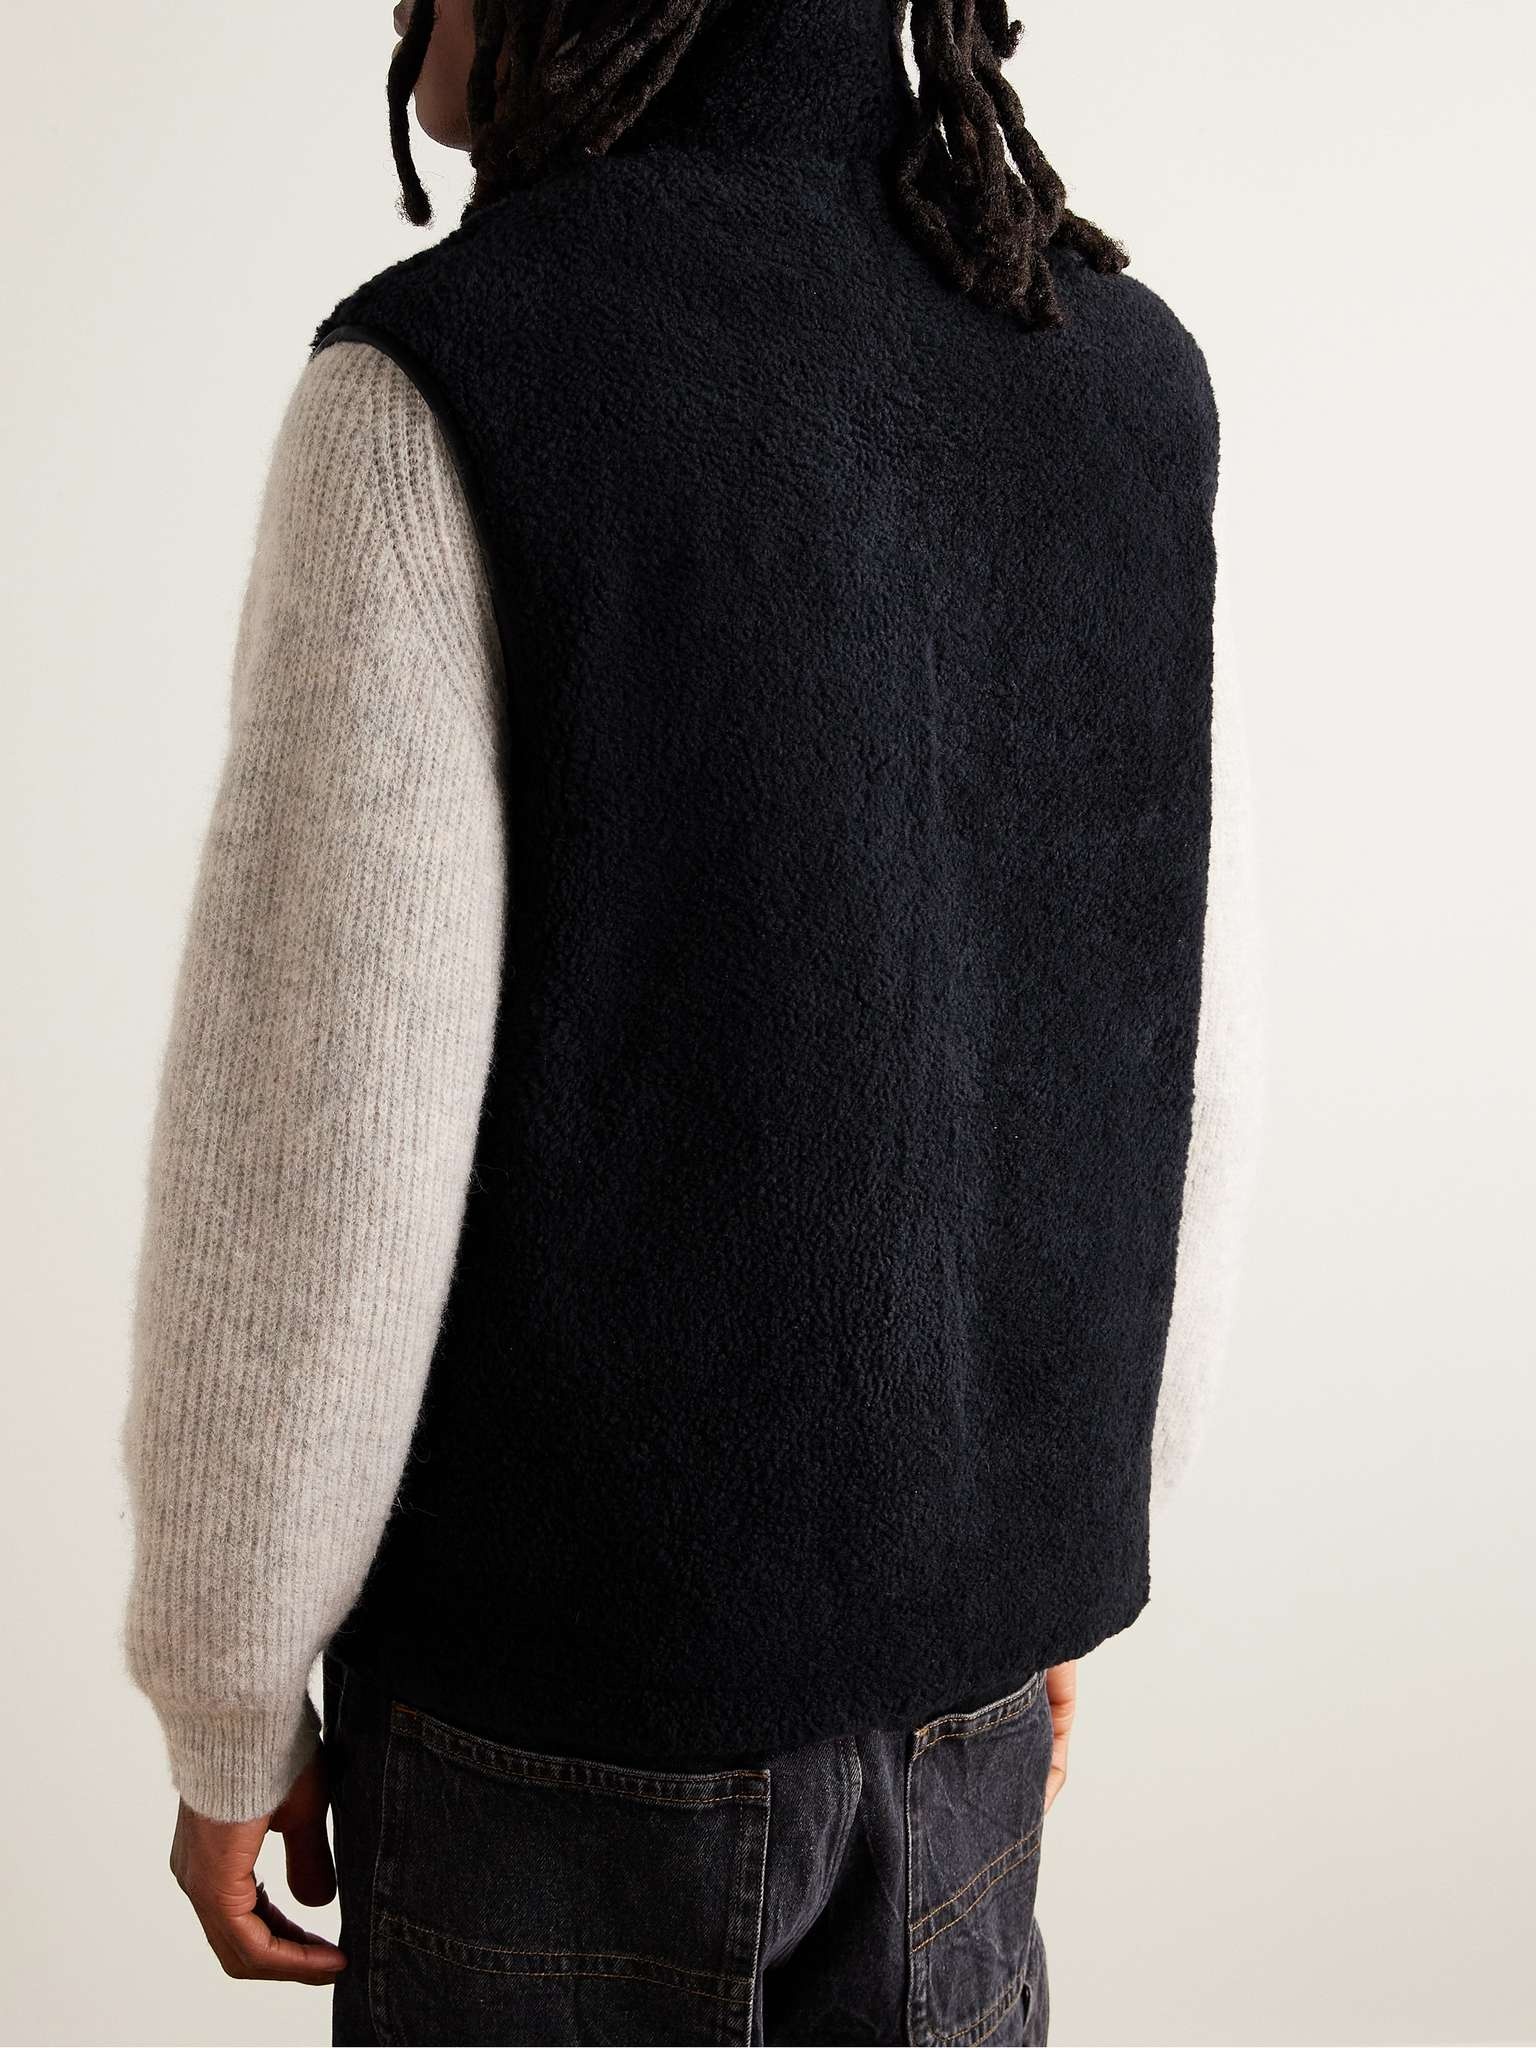 Leather-Trimmed Shearling Gilet - 3